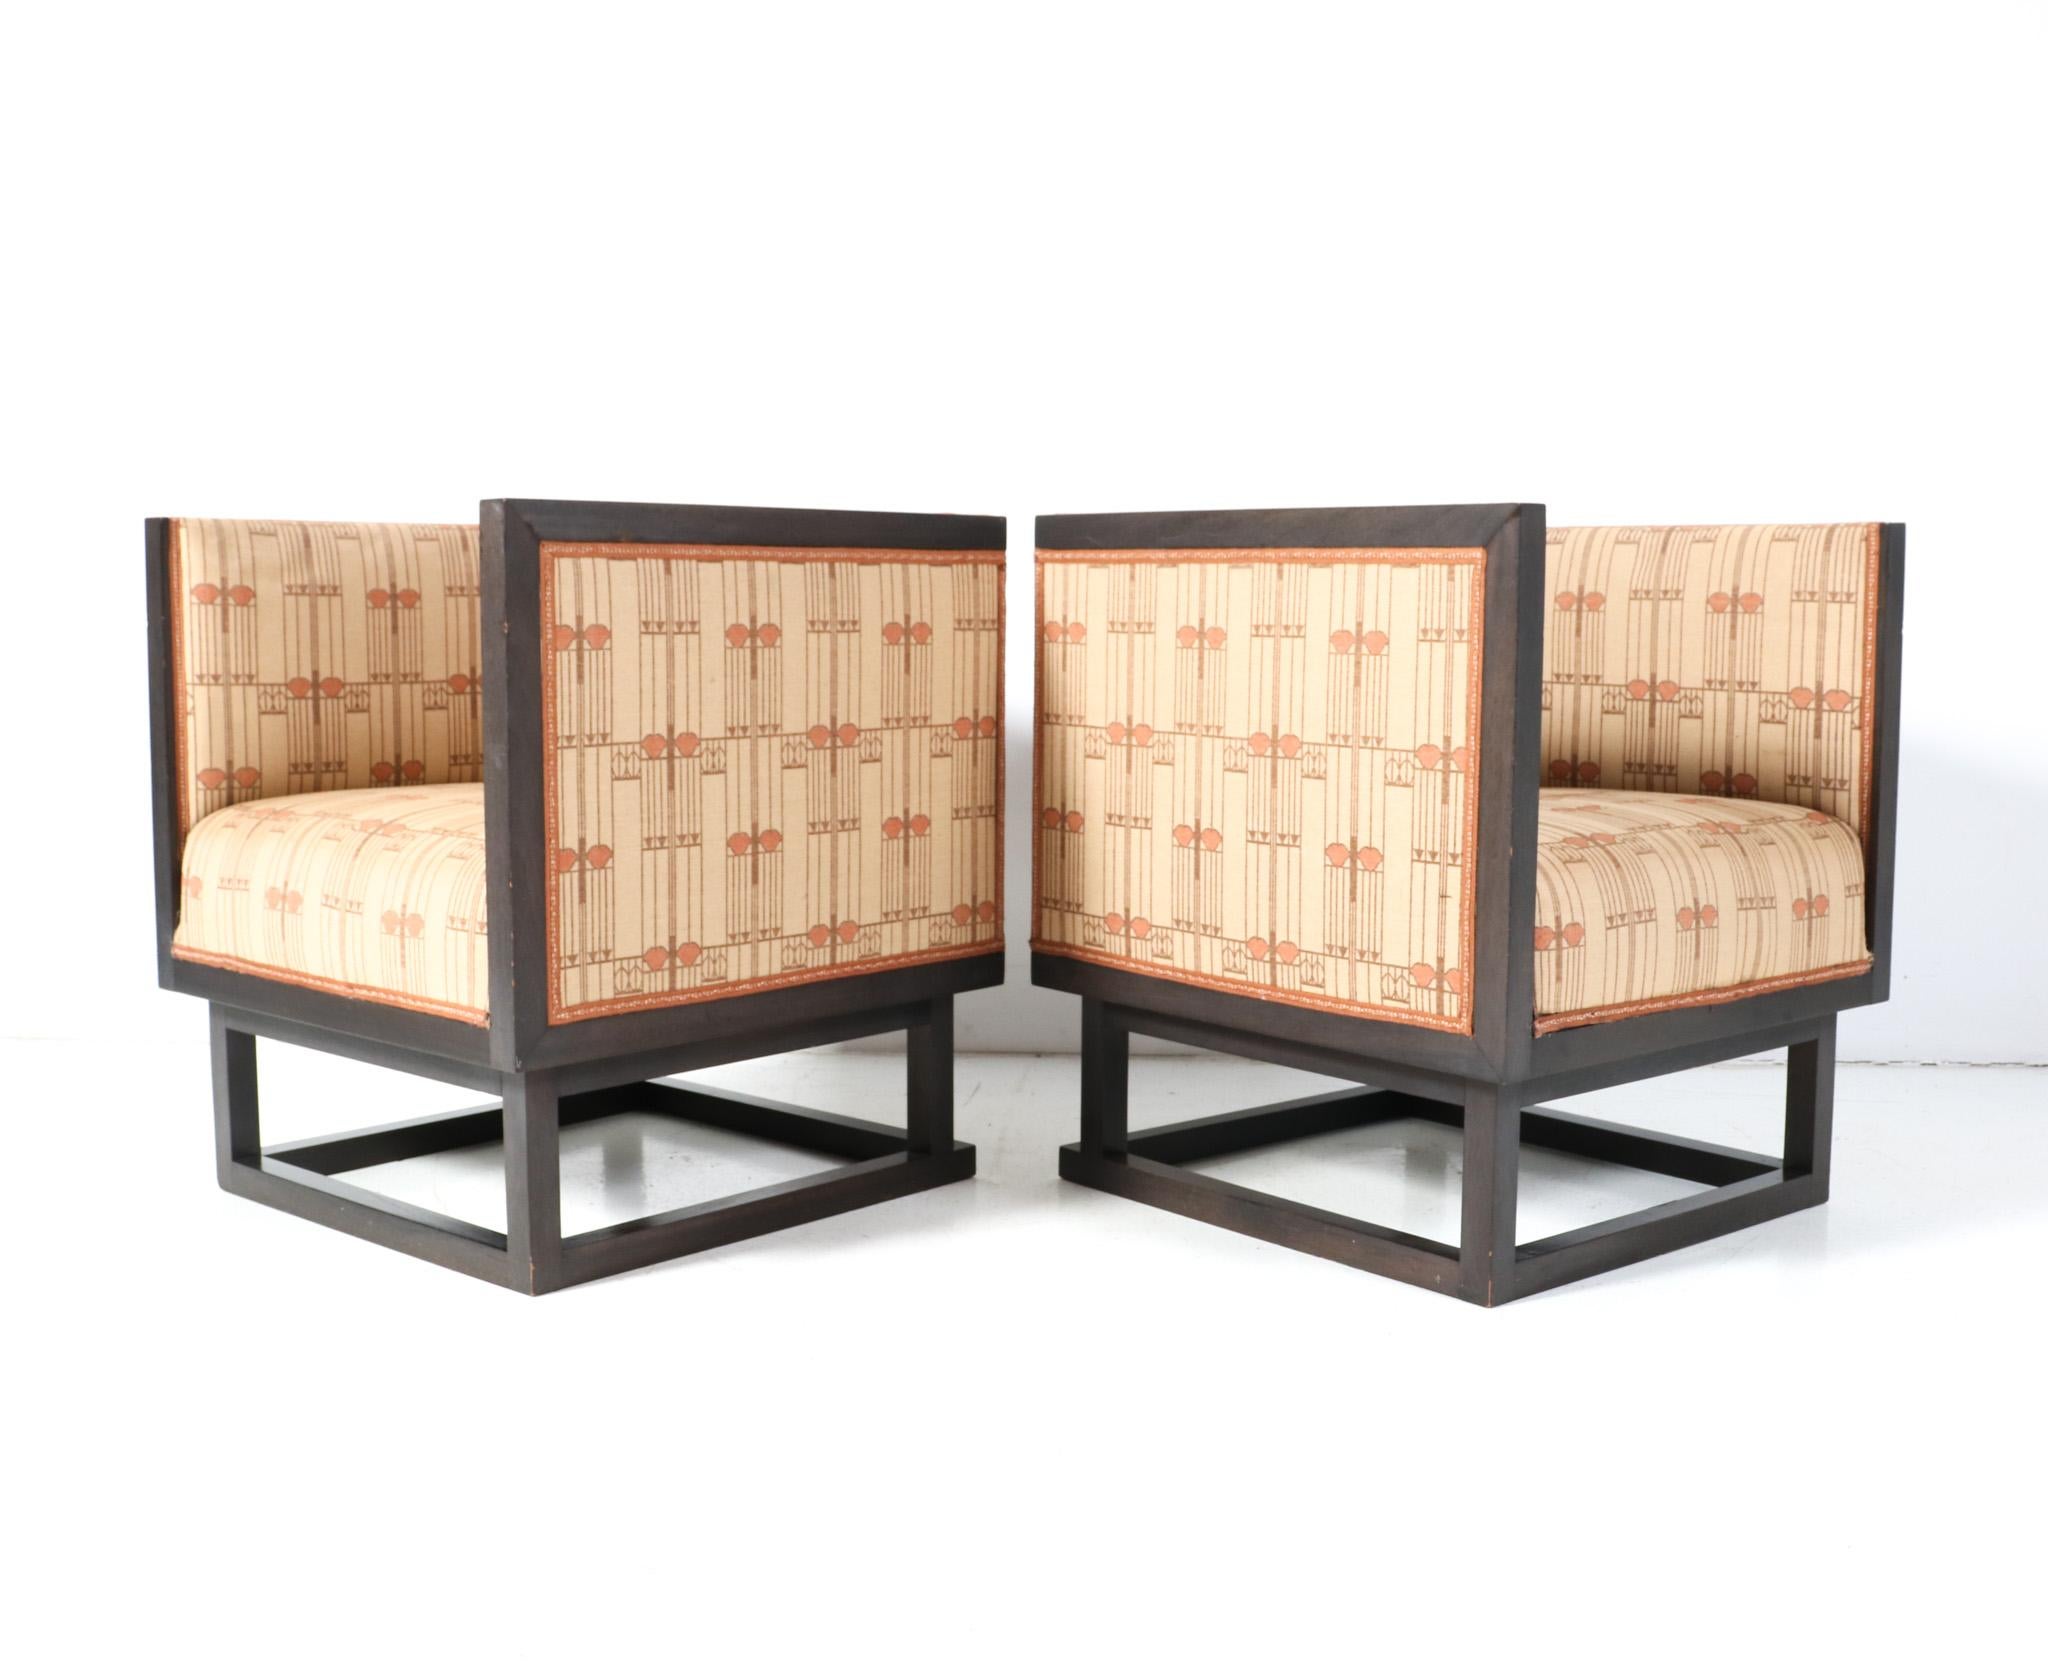 Early 20th Century Pair of Vienna Secession Cabinet Chairs by Josef Hoffmann for Wittmann, 1903